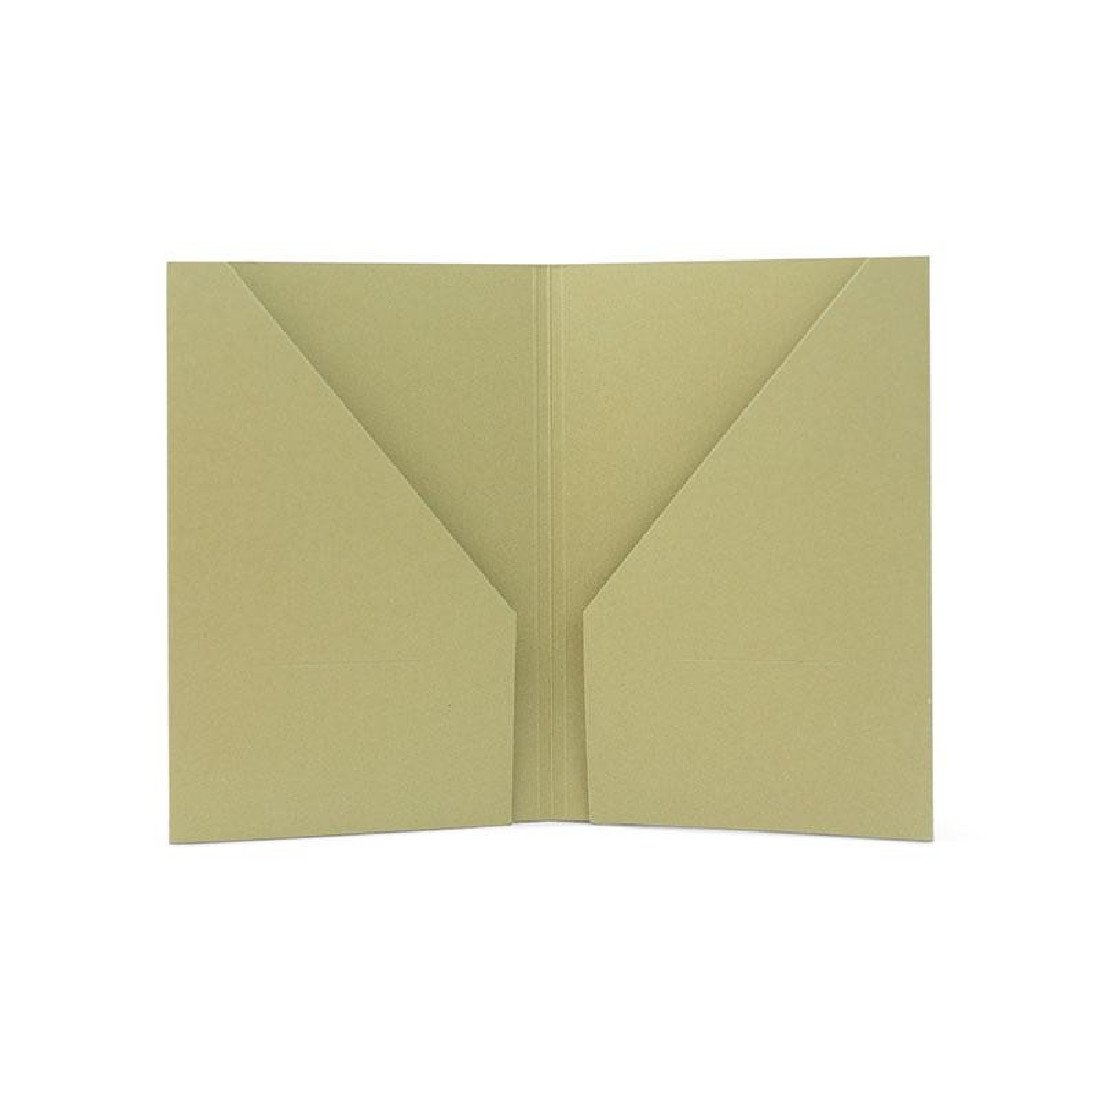 Paper Republic the writers essentials [xl] olive green leather journal kit